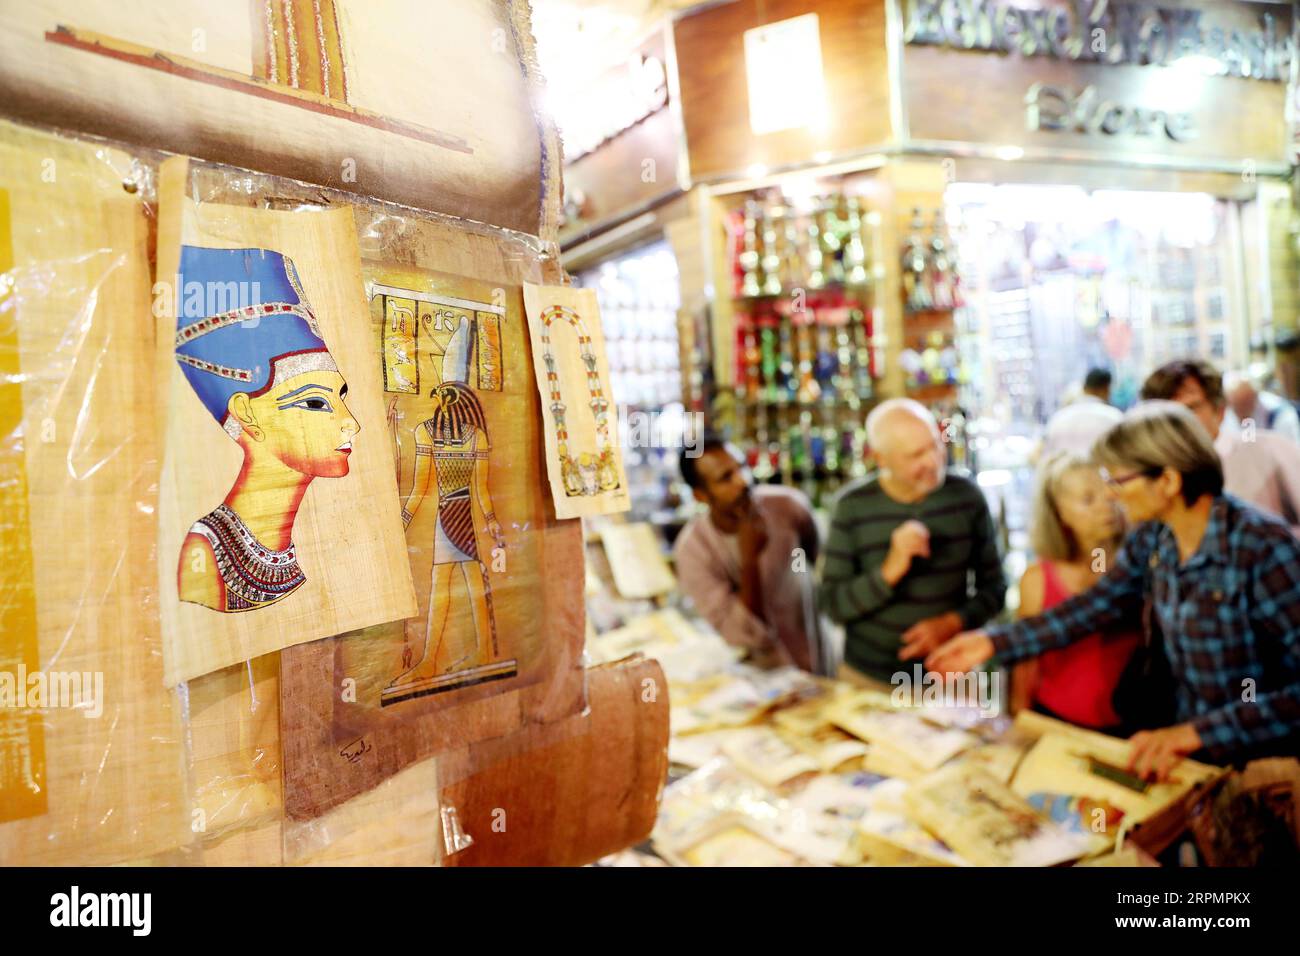 200216 -- CAIRO, Feb. 16, 2020 Xinhua -- Tourists visit a market in Luxor, Egypt on Oct. 11, 2019. Due to an outbreak of the novel coronavirus pneumonia, which originated in China s central city of Wuhan late last year, many Chinese tourists who had planned to travel abroad during the week-long Spring Festival holiday chose instead to stay at home. Despite the apparent impact from the declining number of Chinese visitors right now, the Egyptian people have expressed their confidence in China s ability to overcome the disease and voiced hopes for the return of Chinese travelers as soon as possi Stock Photo